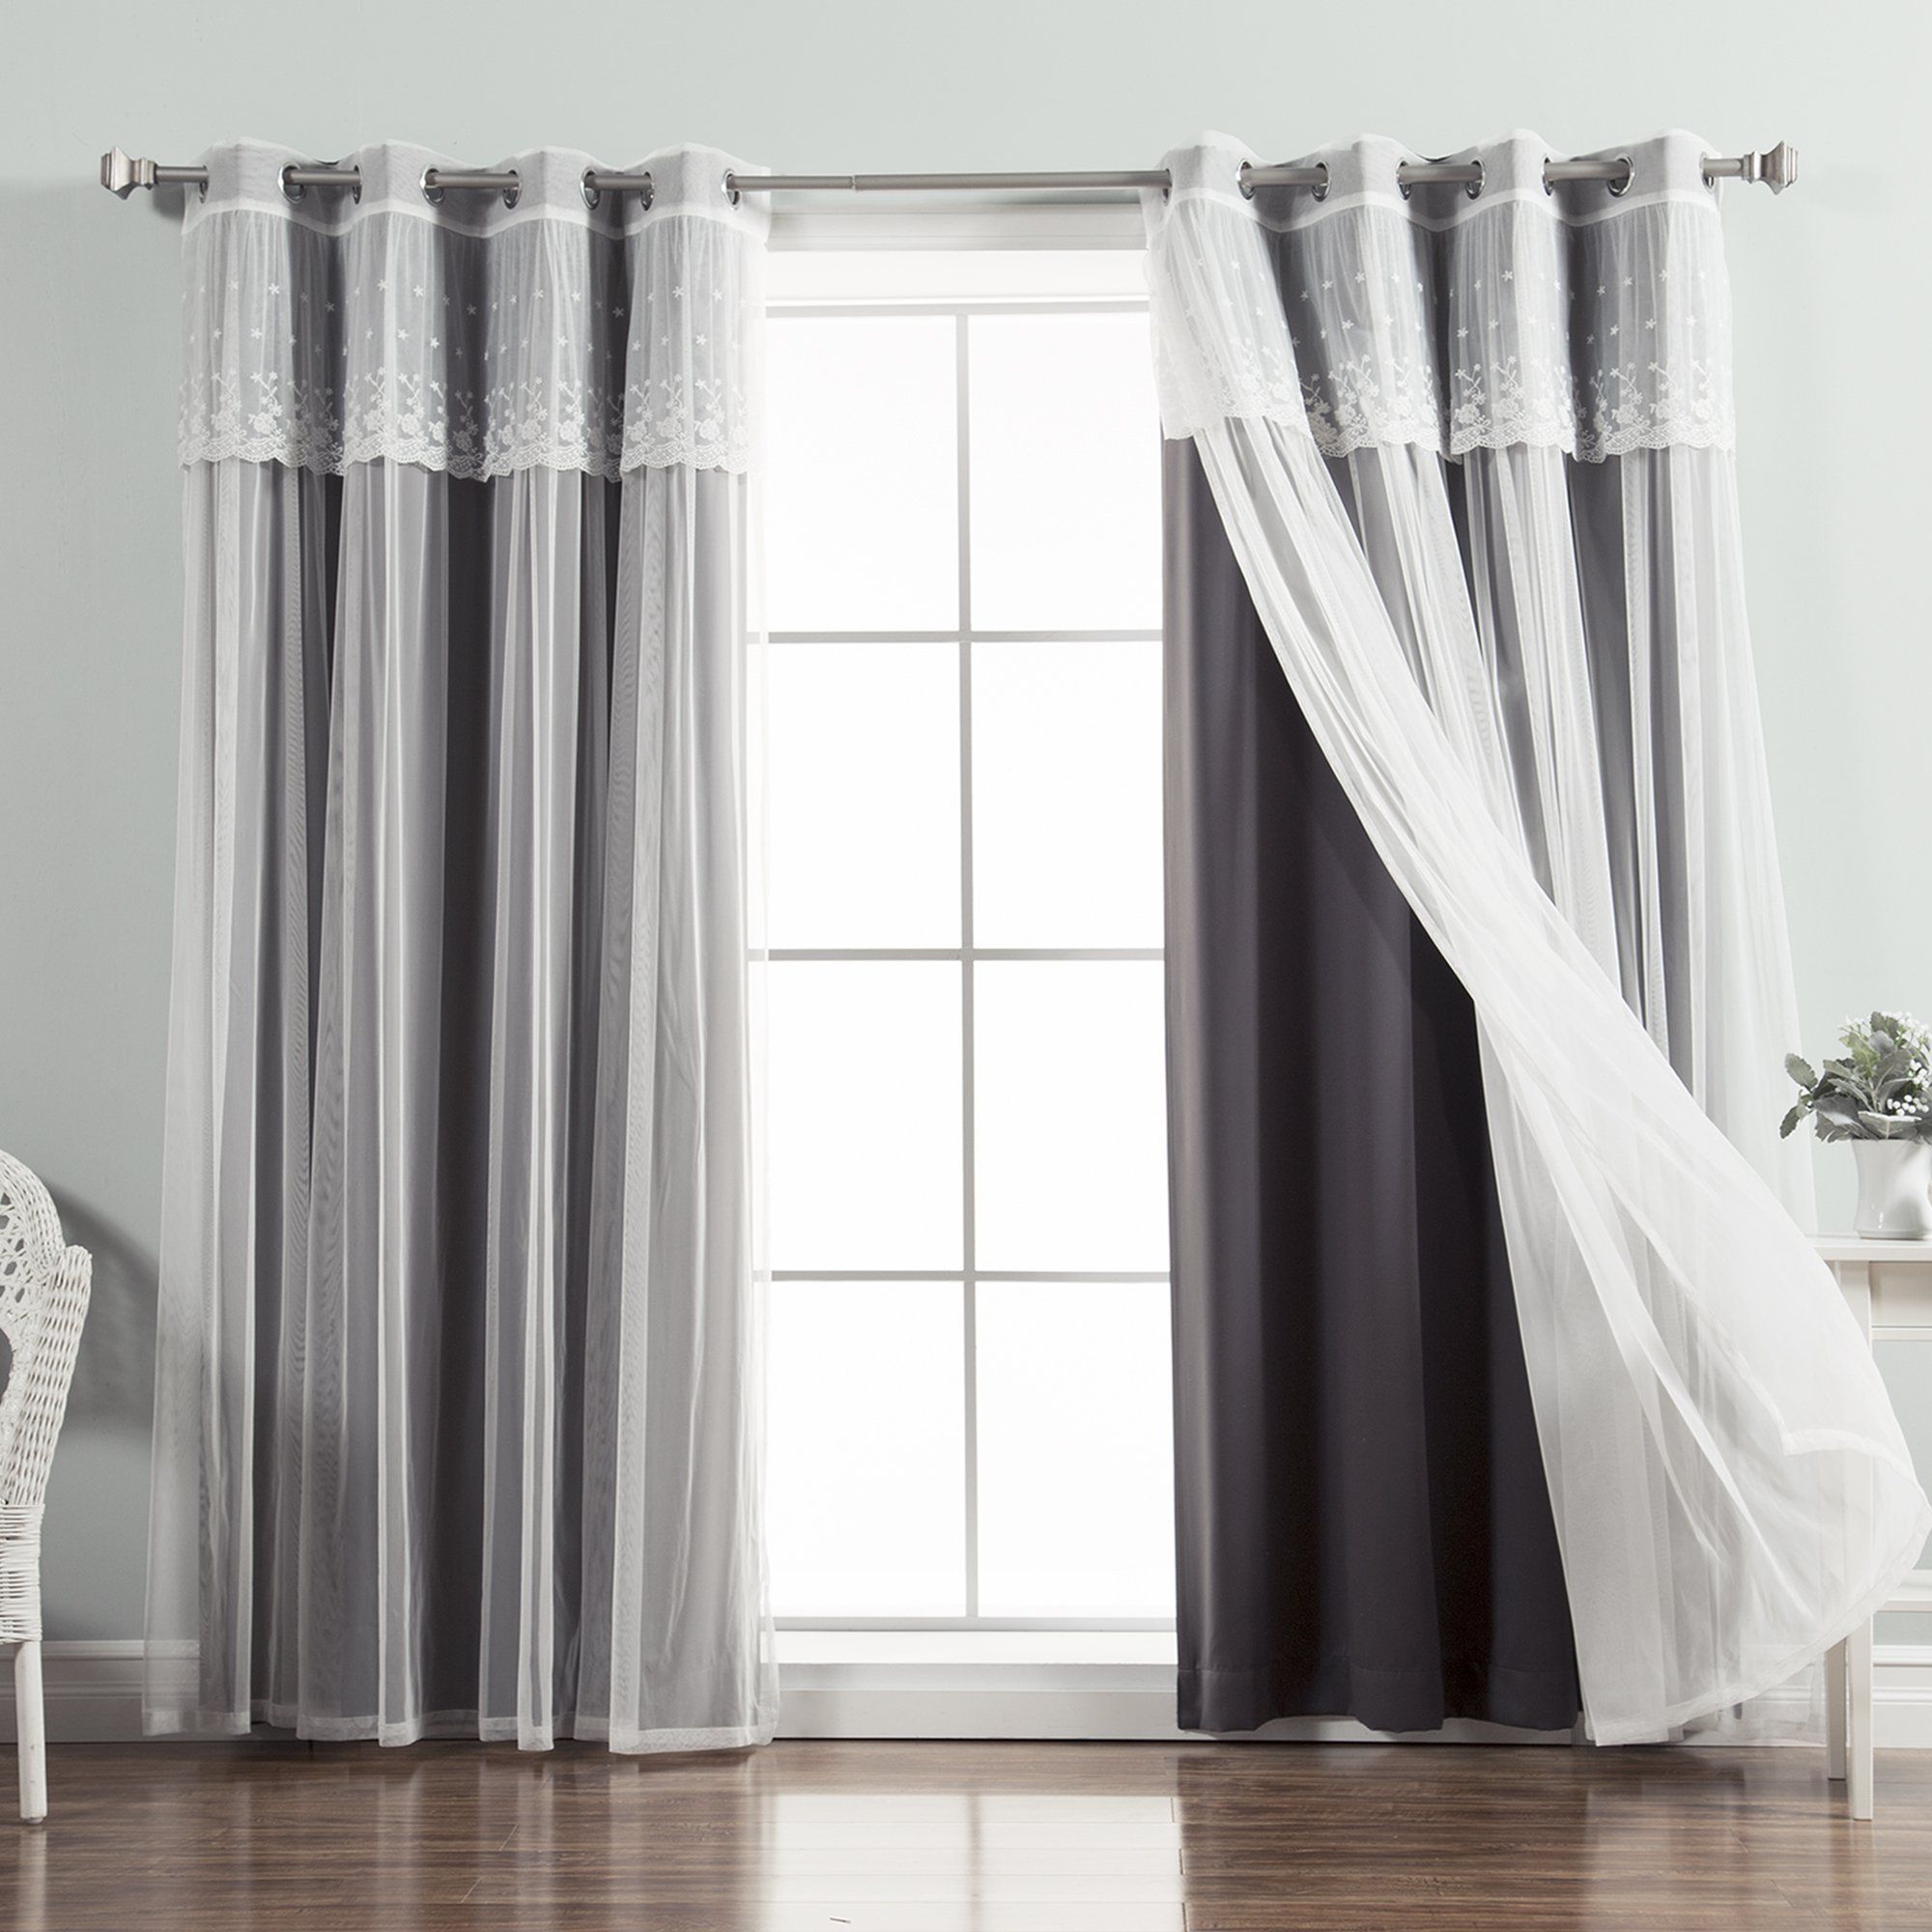 Latest Tulle Sheer With Attached Valance And Blackout 4 Piece Curtain Panel Pairs Pertaining To Best Home Fashion Mix And Match Tulle Sheer With Attached (View 9 of 20)